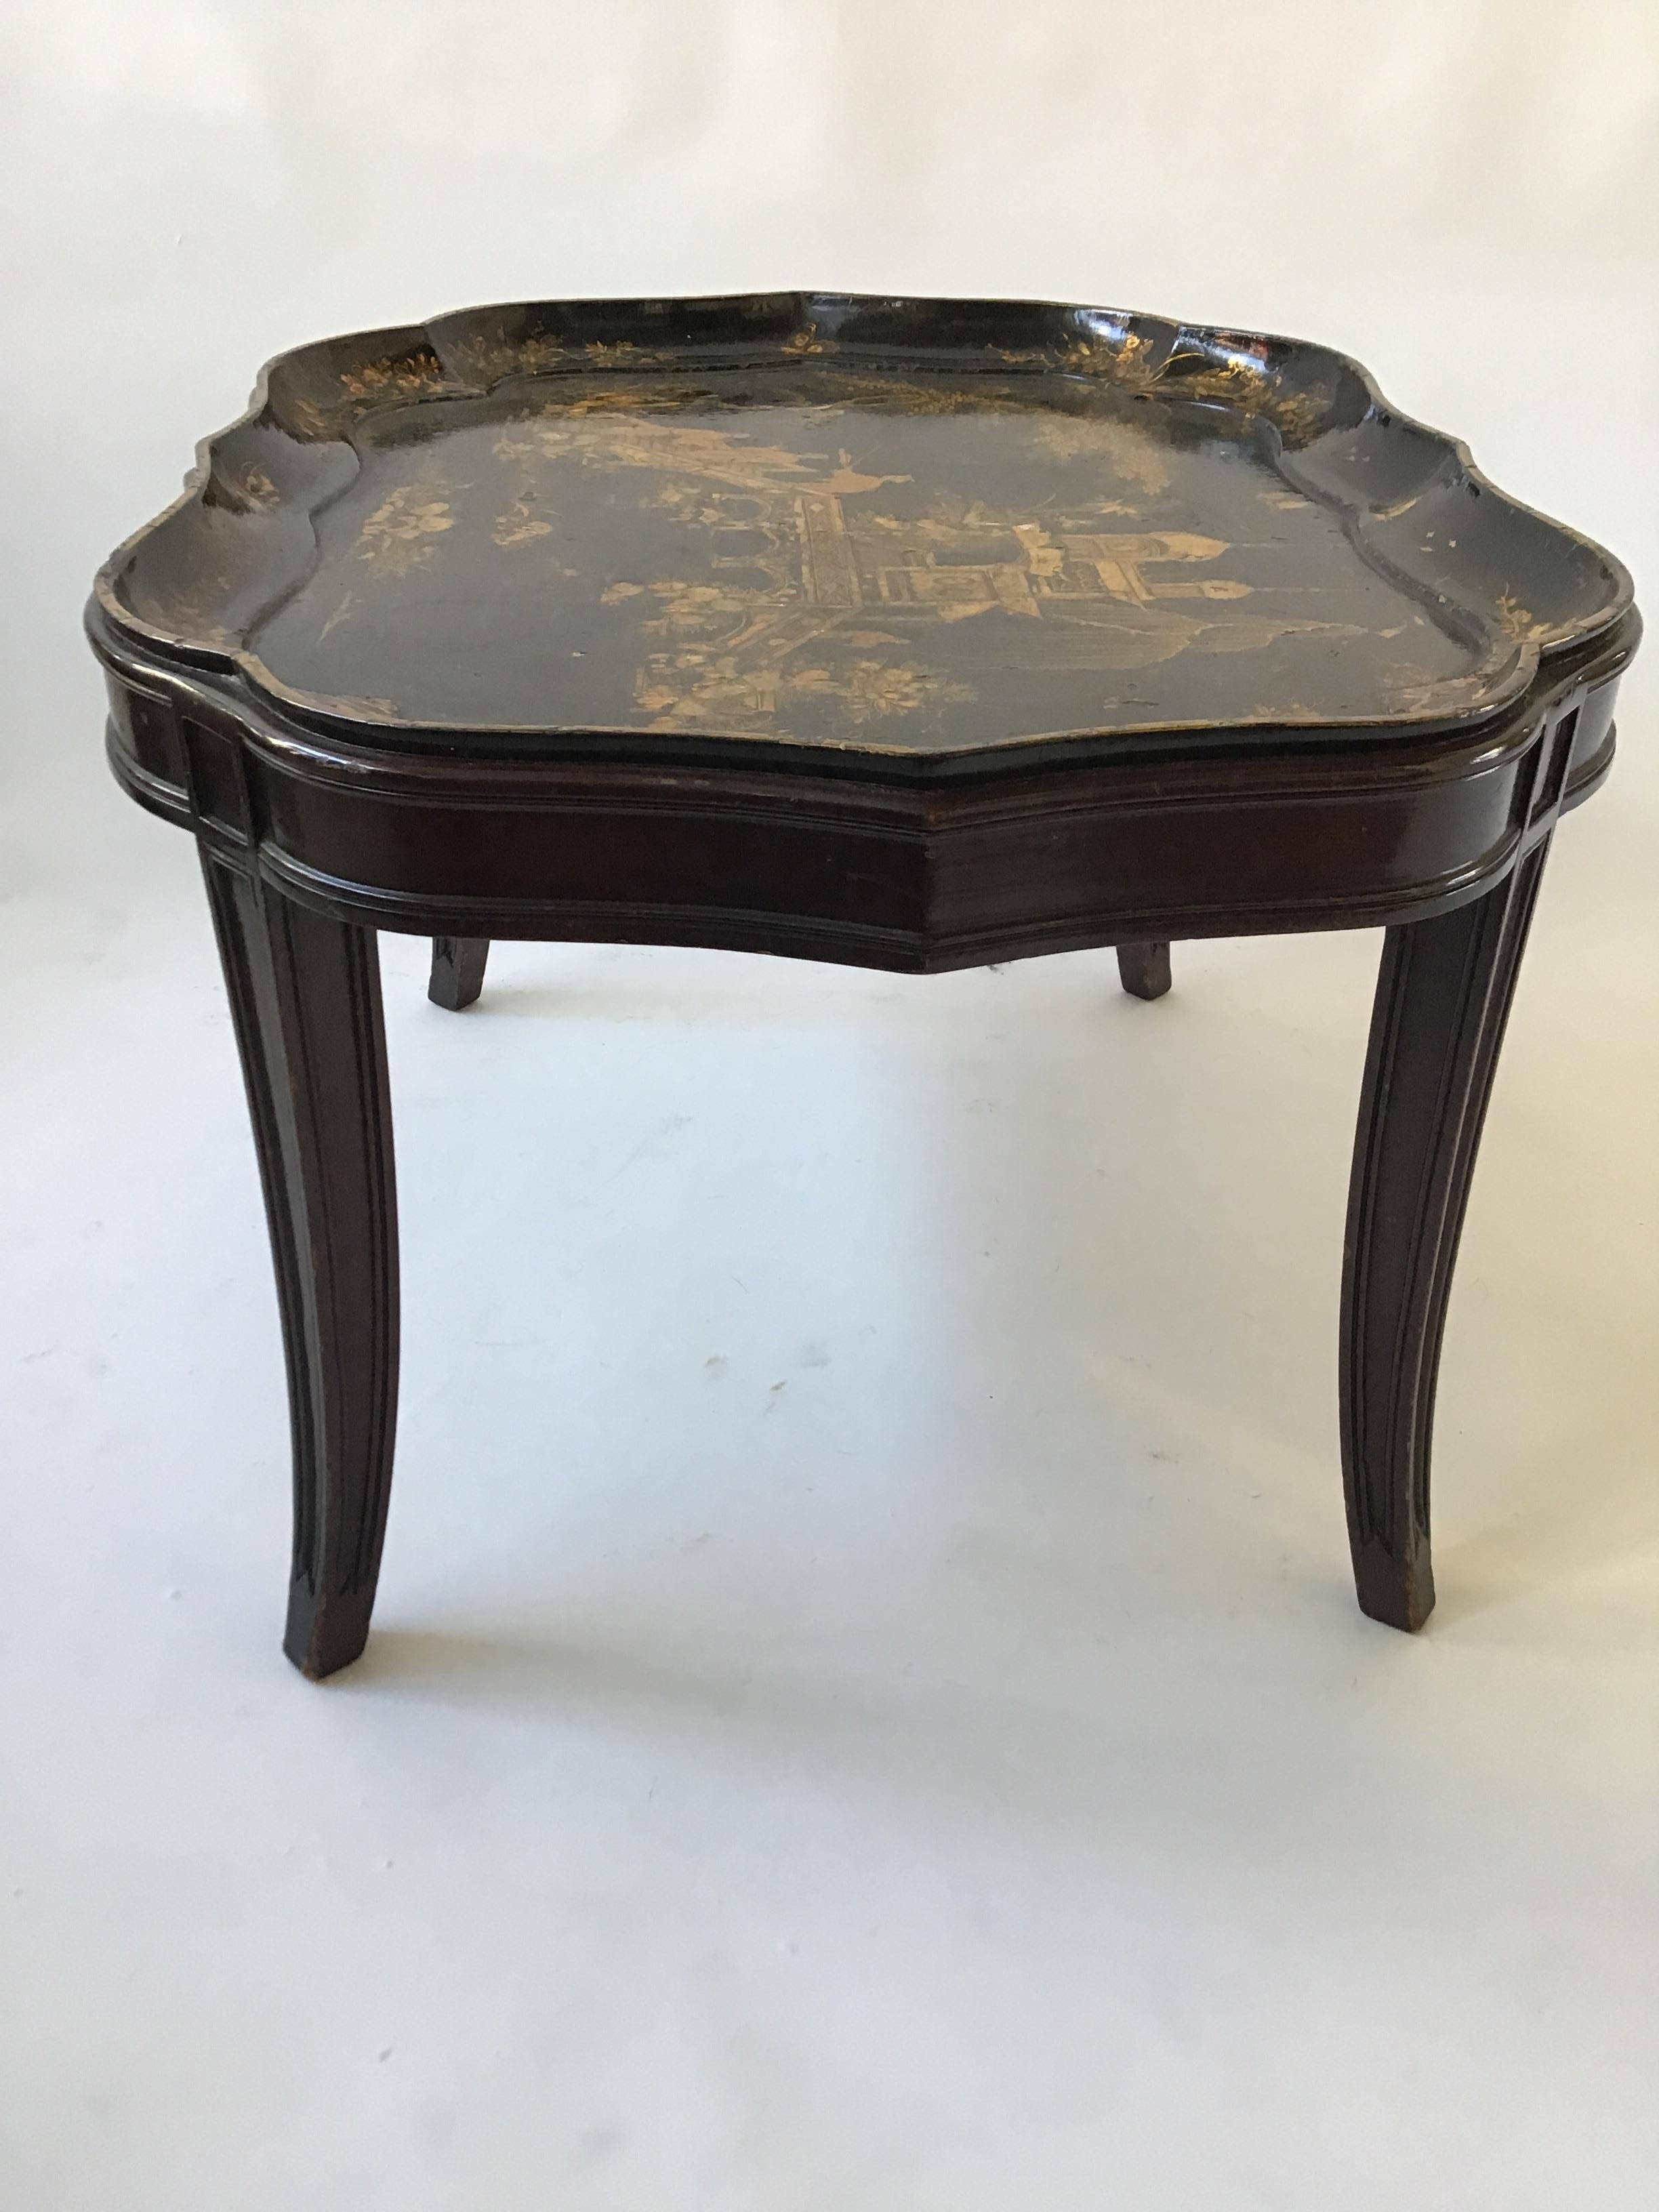 1880s English Chinoiserie Paper Mache Tray Table 4